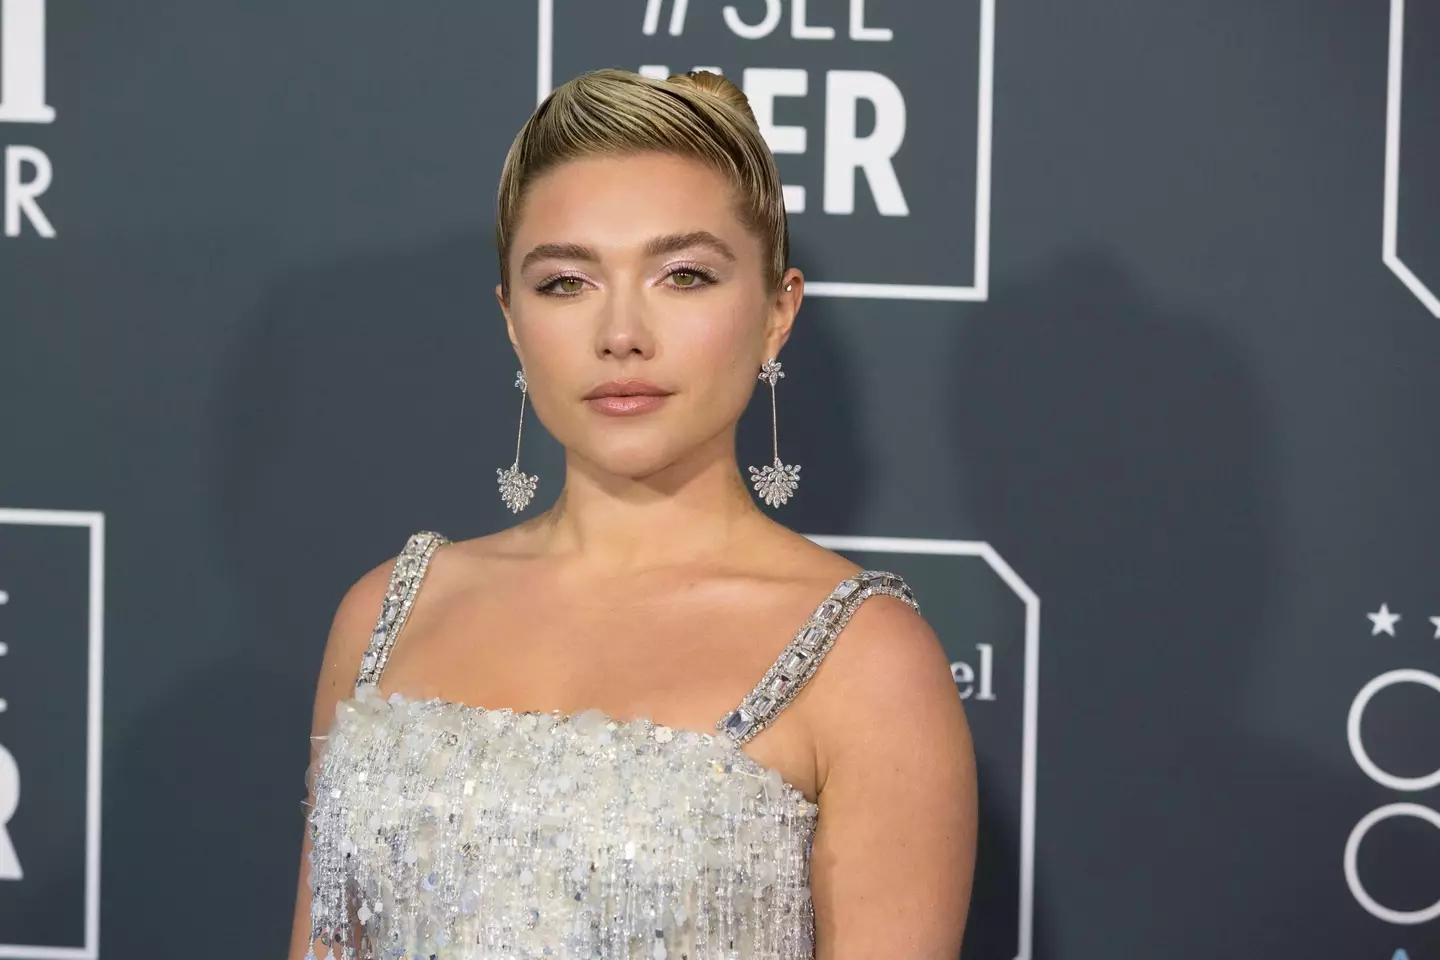 Florence Pugh's family moved to Spain when she was young for her health.